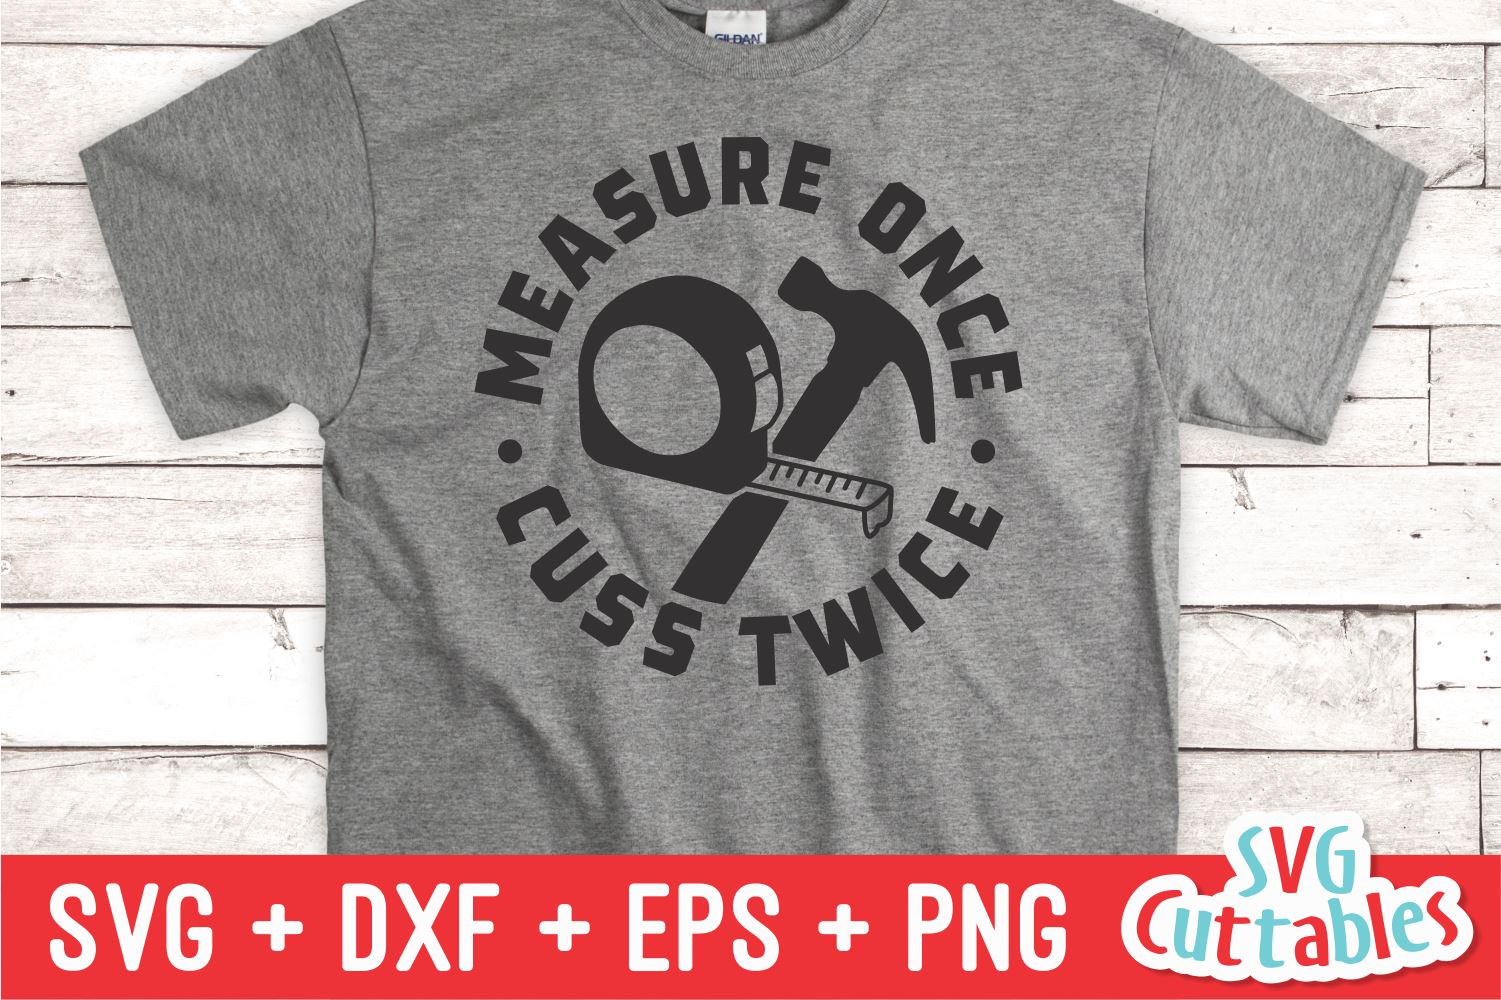 Download Measure Once Cuss Twice Svg Father S Day Funny Dad Shirt Design Zero Turn Cut File Svg Dxf Eps Png Silhouette Cricut So Fontsy